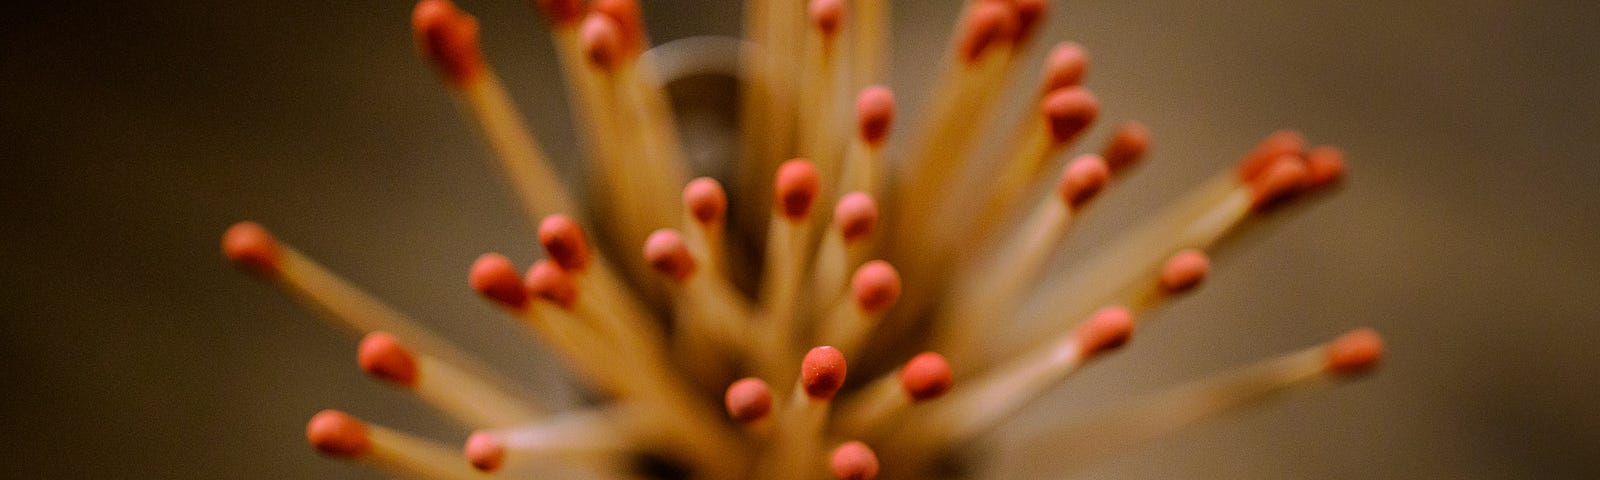 A handful of wooden matches with red tips standing fanned out on end against a smoky brown background.